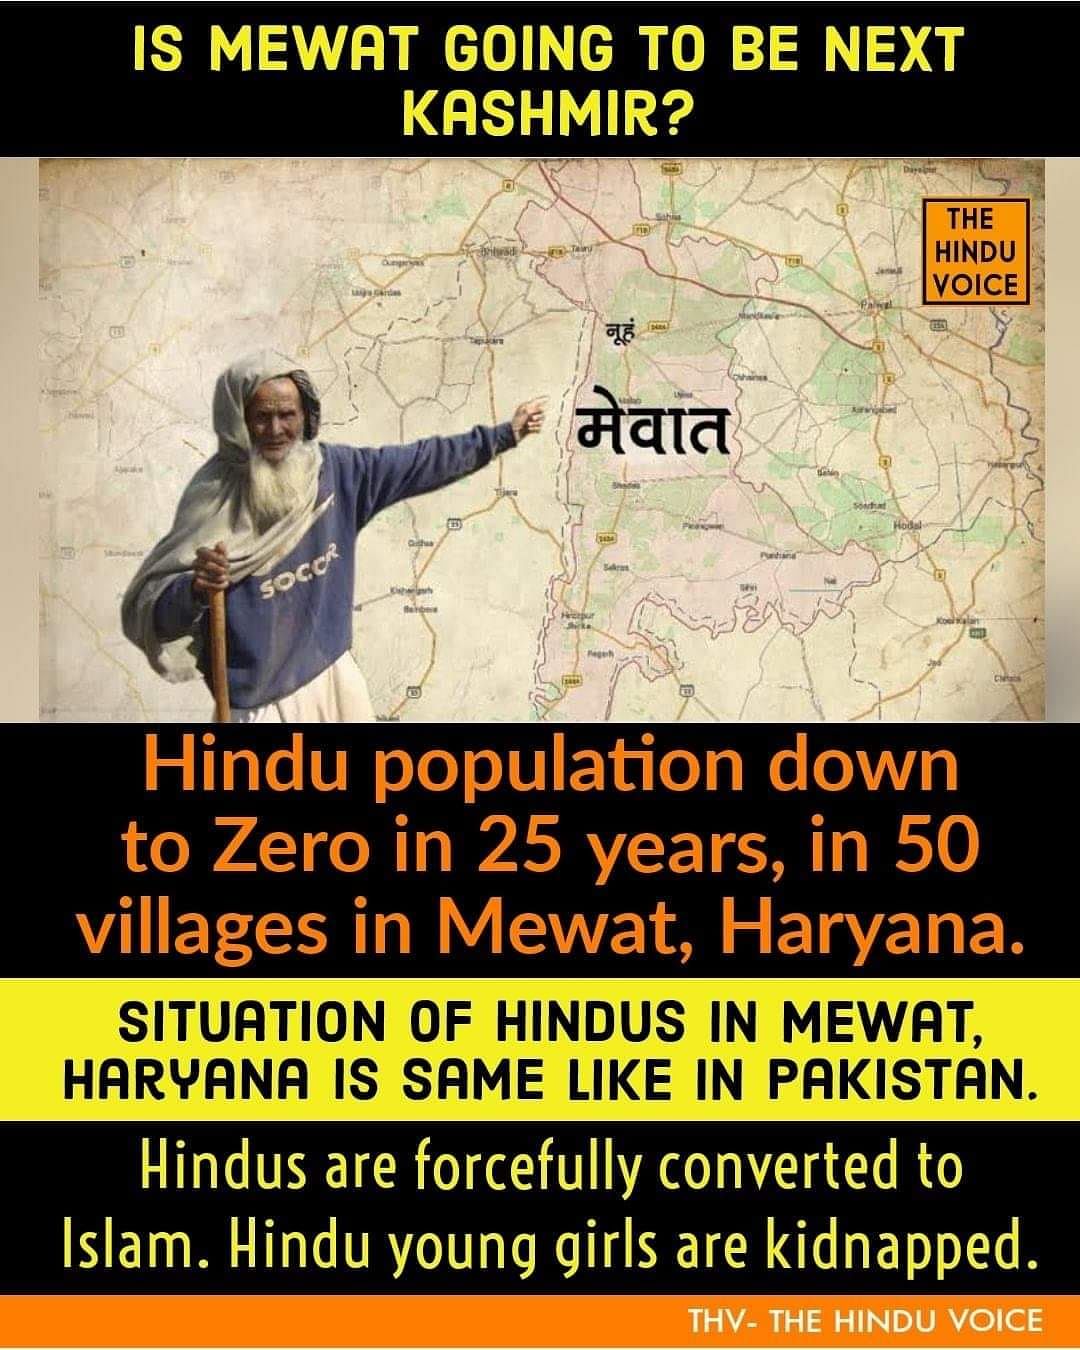 Why do Hindutva outfits have a disproportionate focus on Mewat?